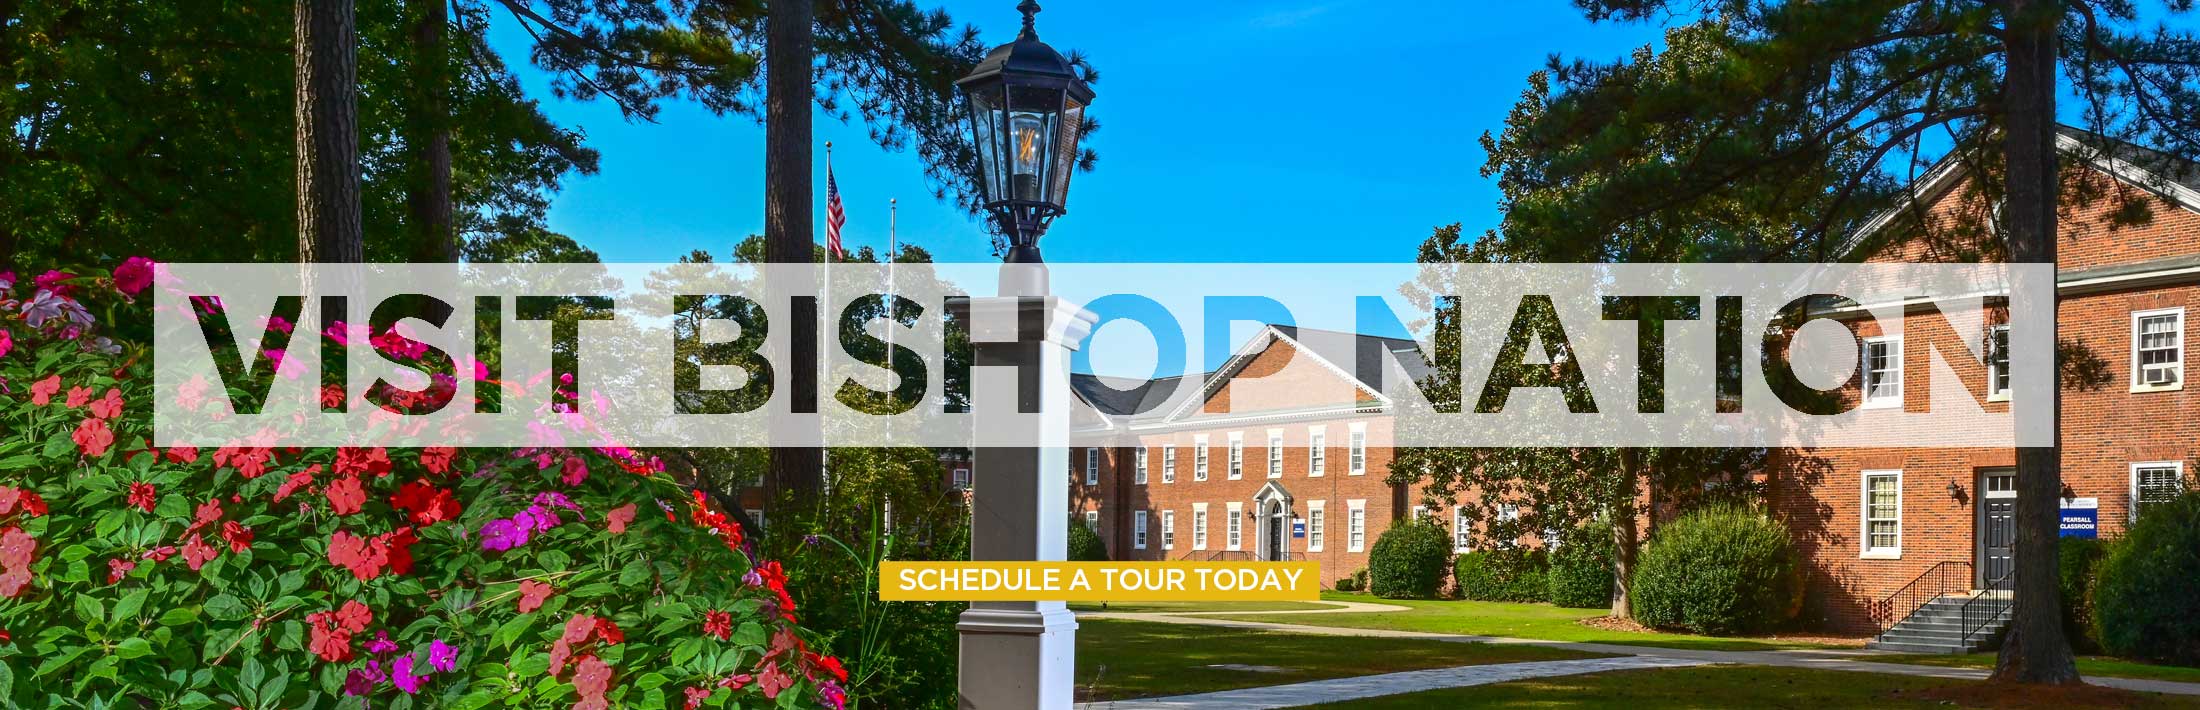 visit bishop nation image with flowers and building